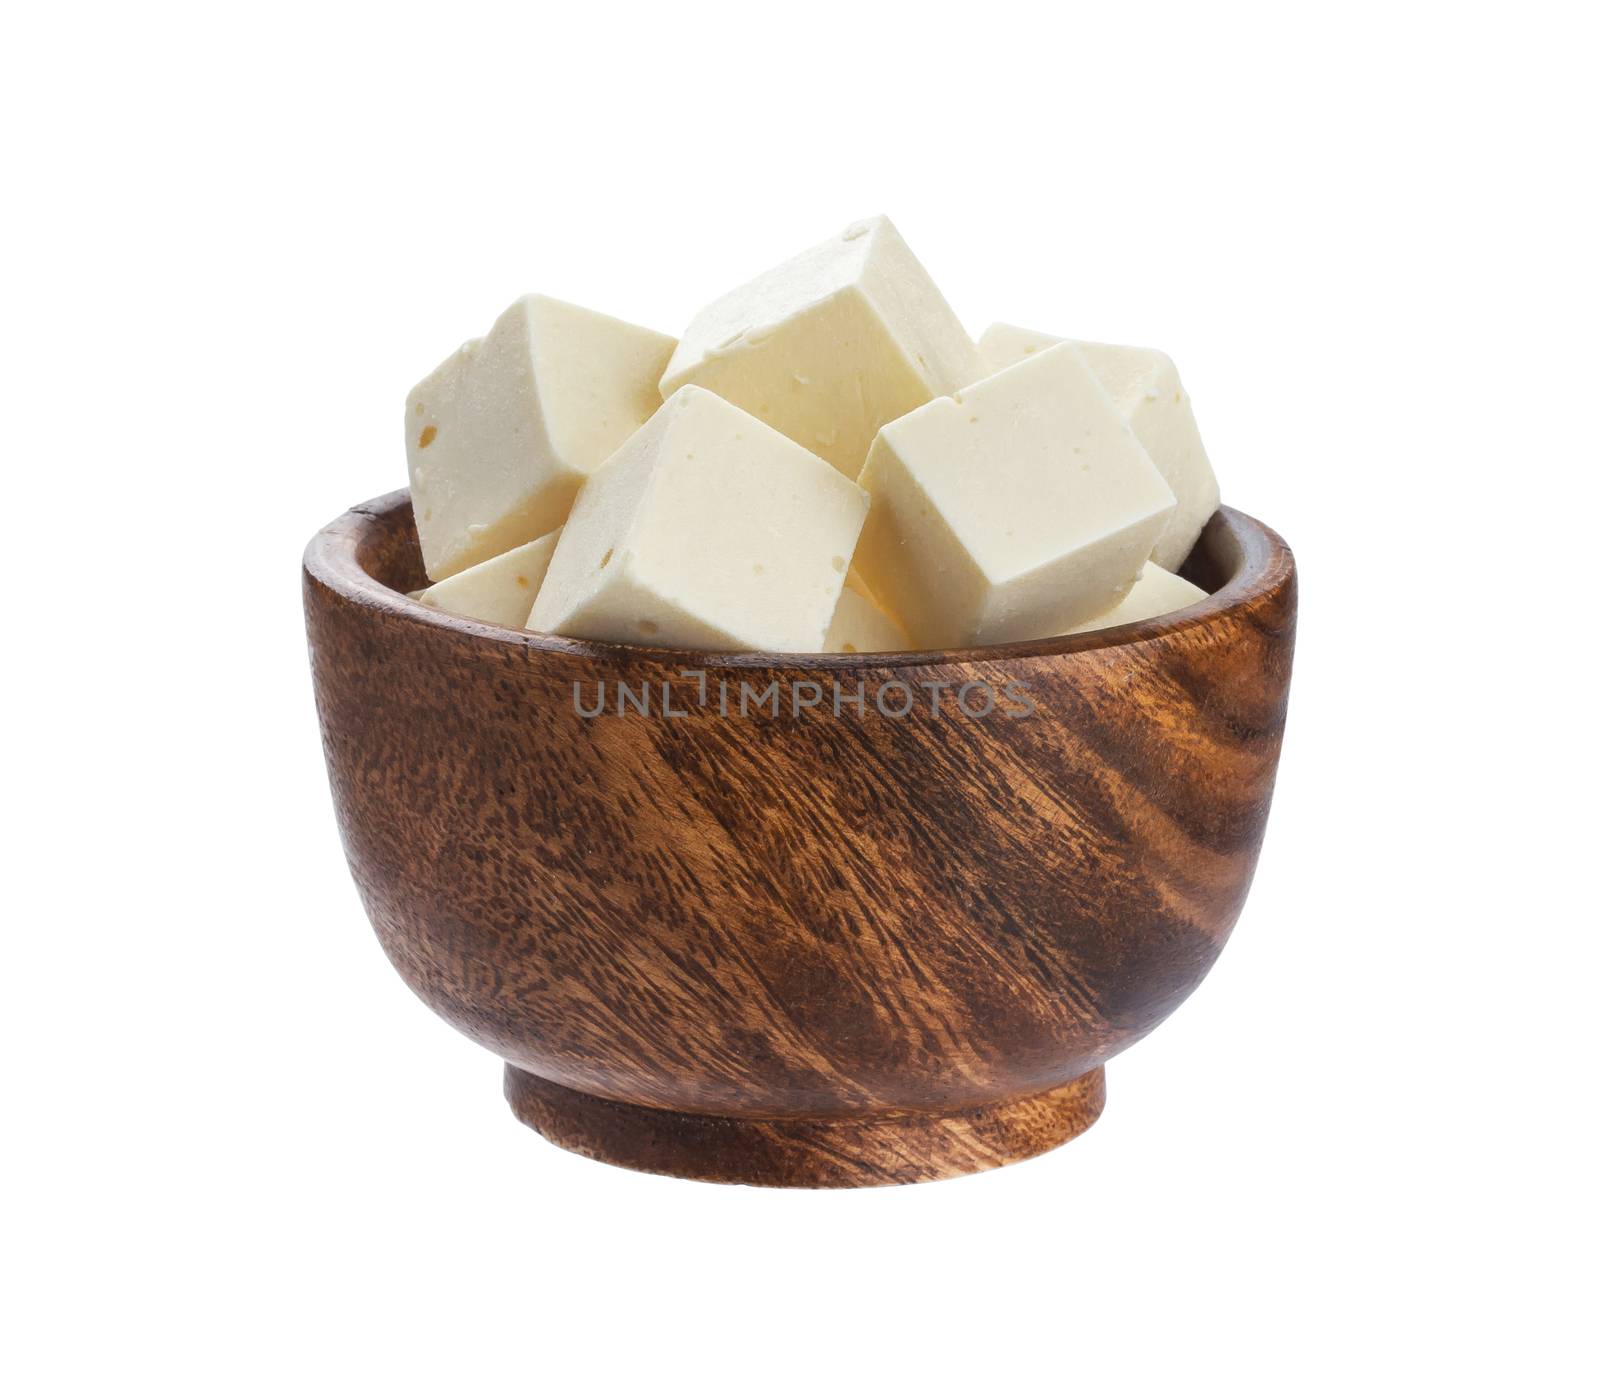 Greek feta cubes in wooden bowl. Diced soft cheese isolated on white background by xamtiw